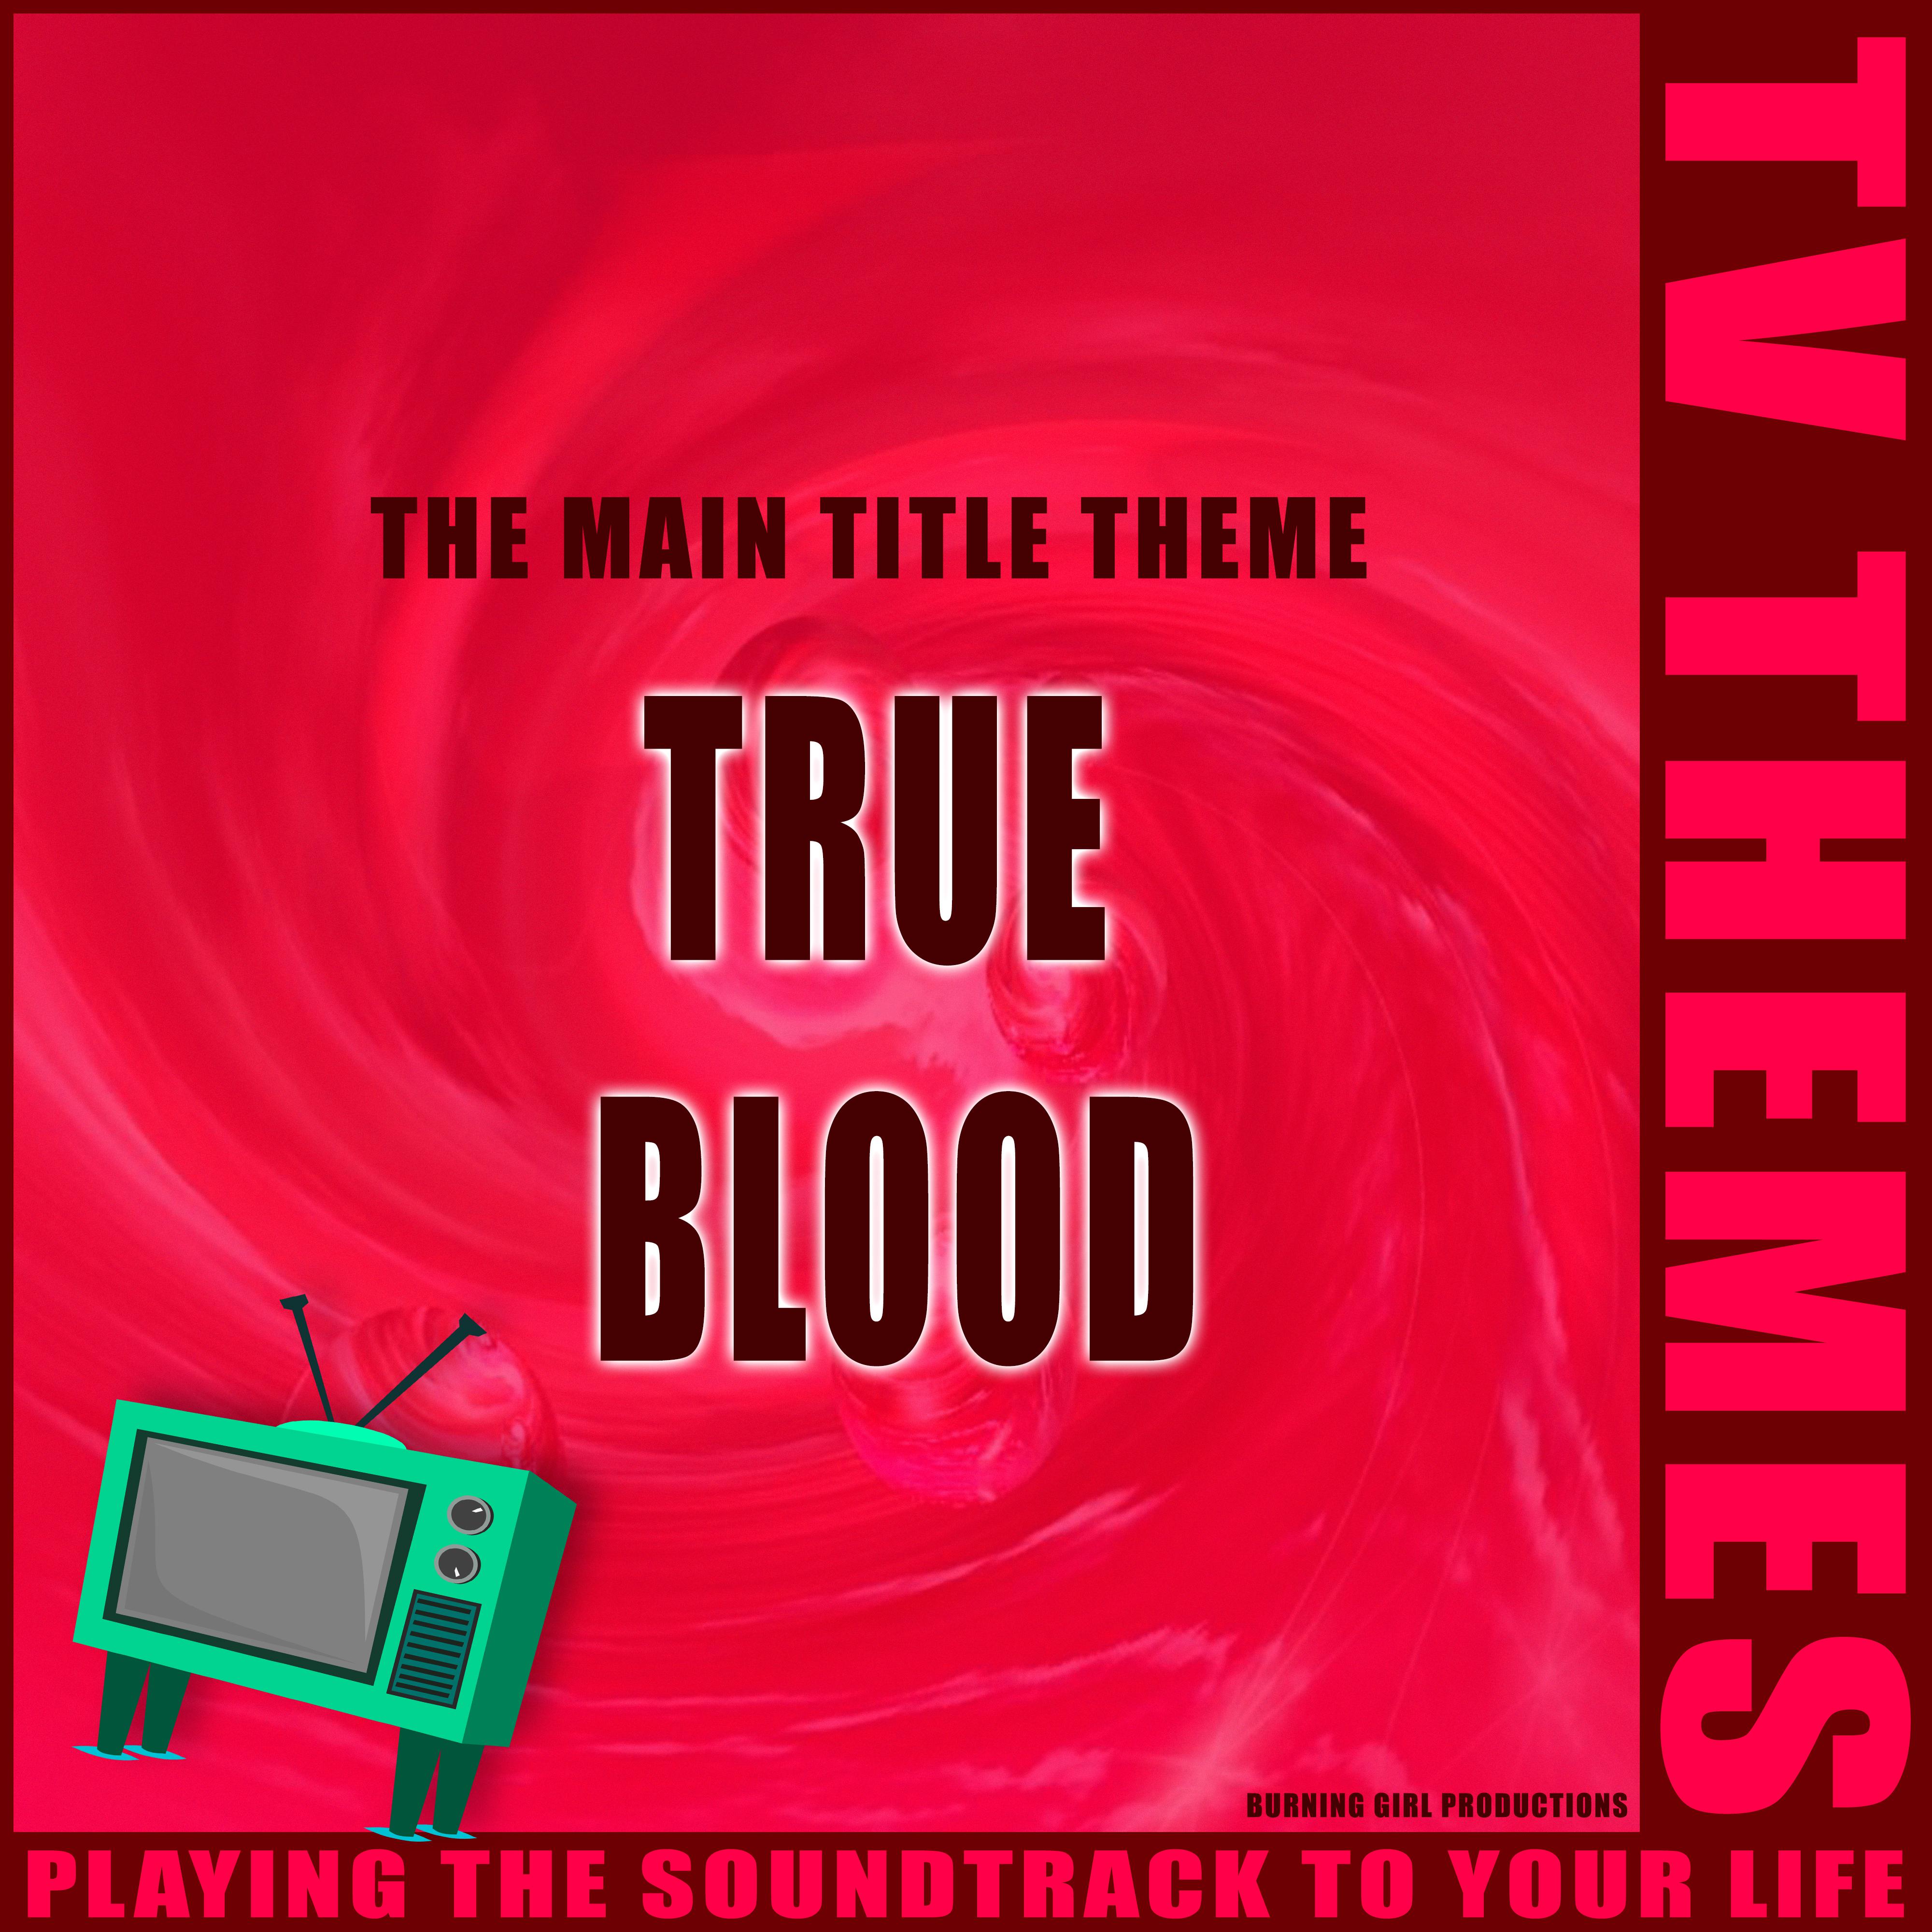 The Main Title Theme - True Blood